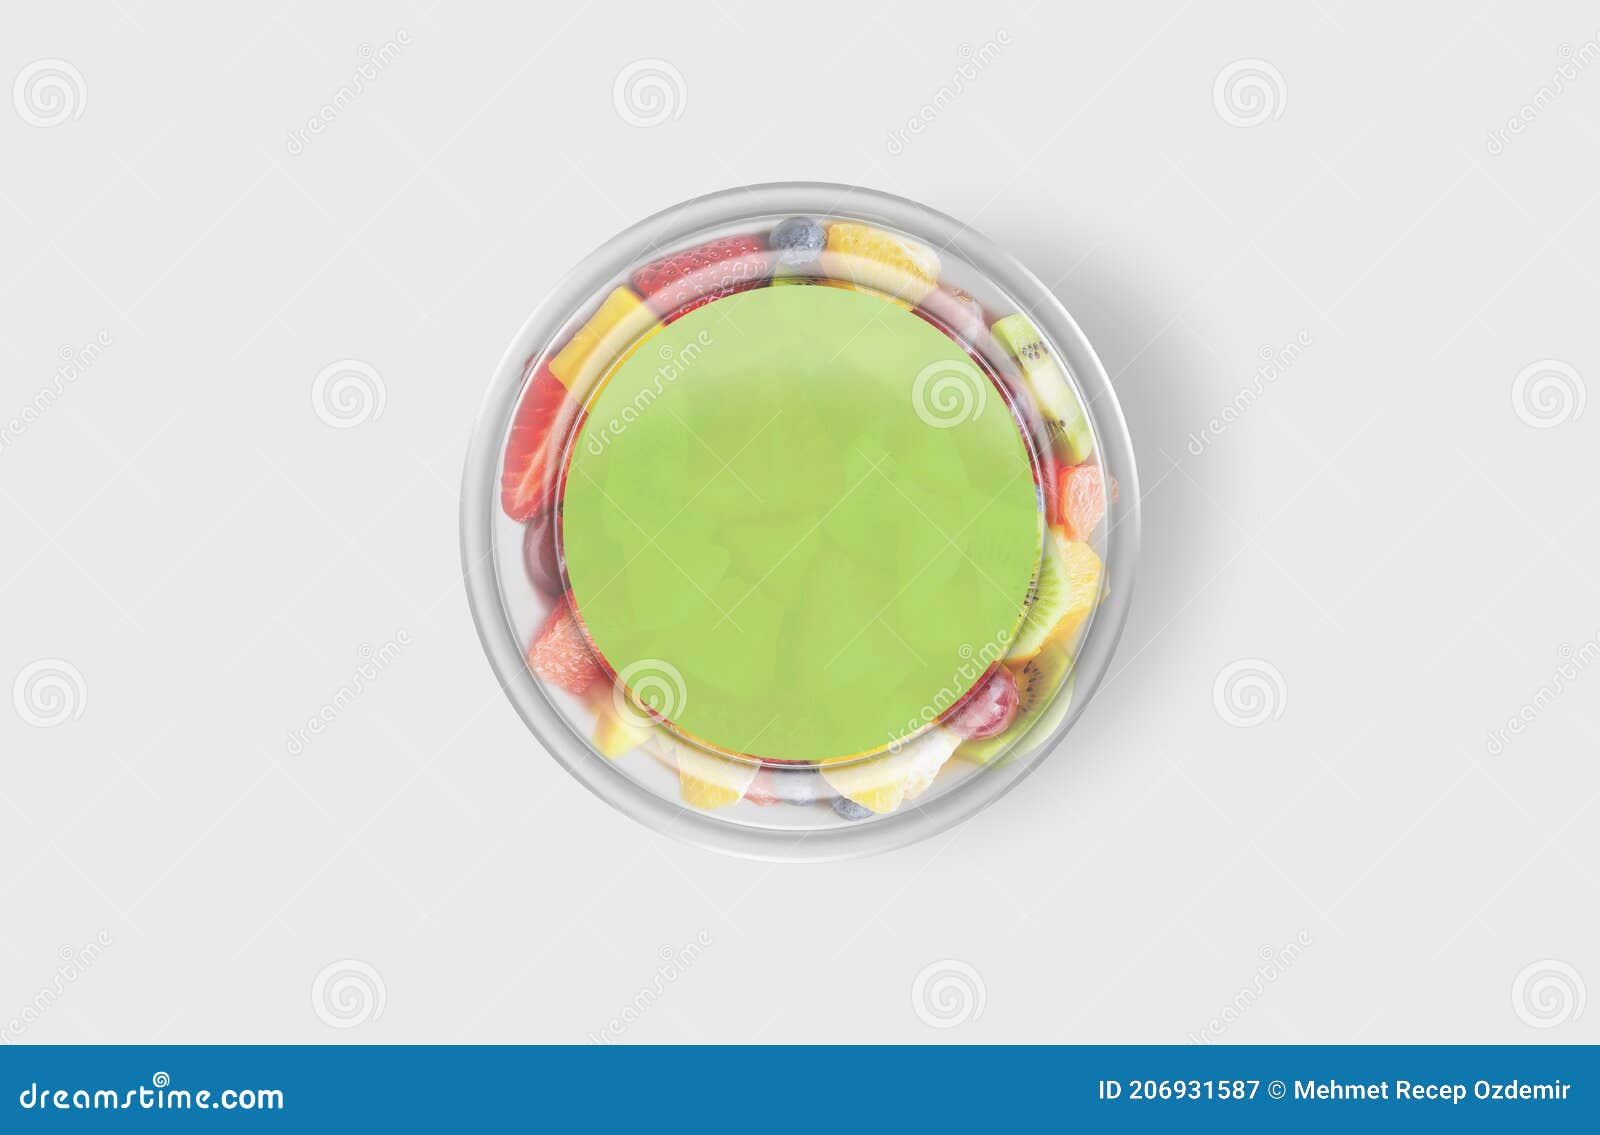 Download 13 654 Food Container Mockup Photos Free Royalty Free Stock Photos From Dreamstime